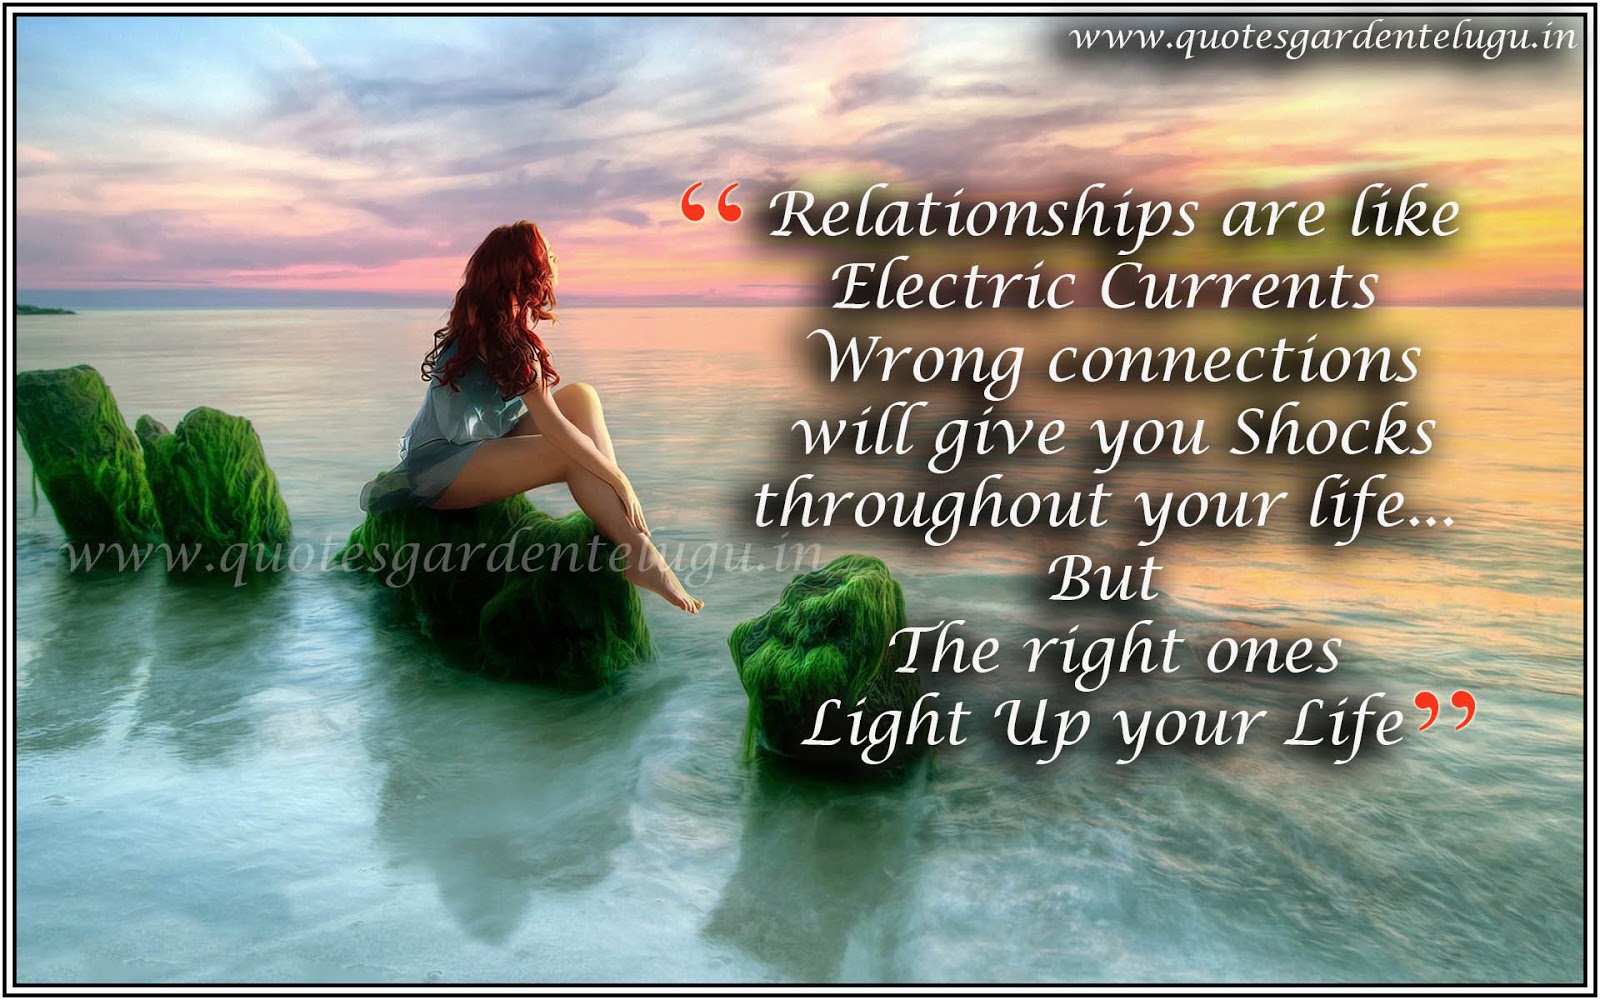 heart touching love messages wallpapers | QUOTES GARDEN ...